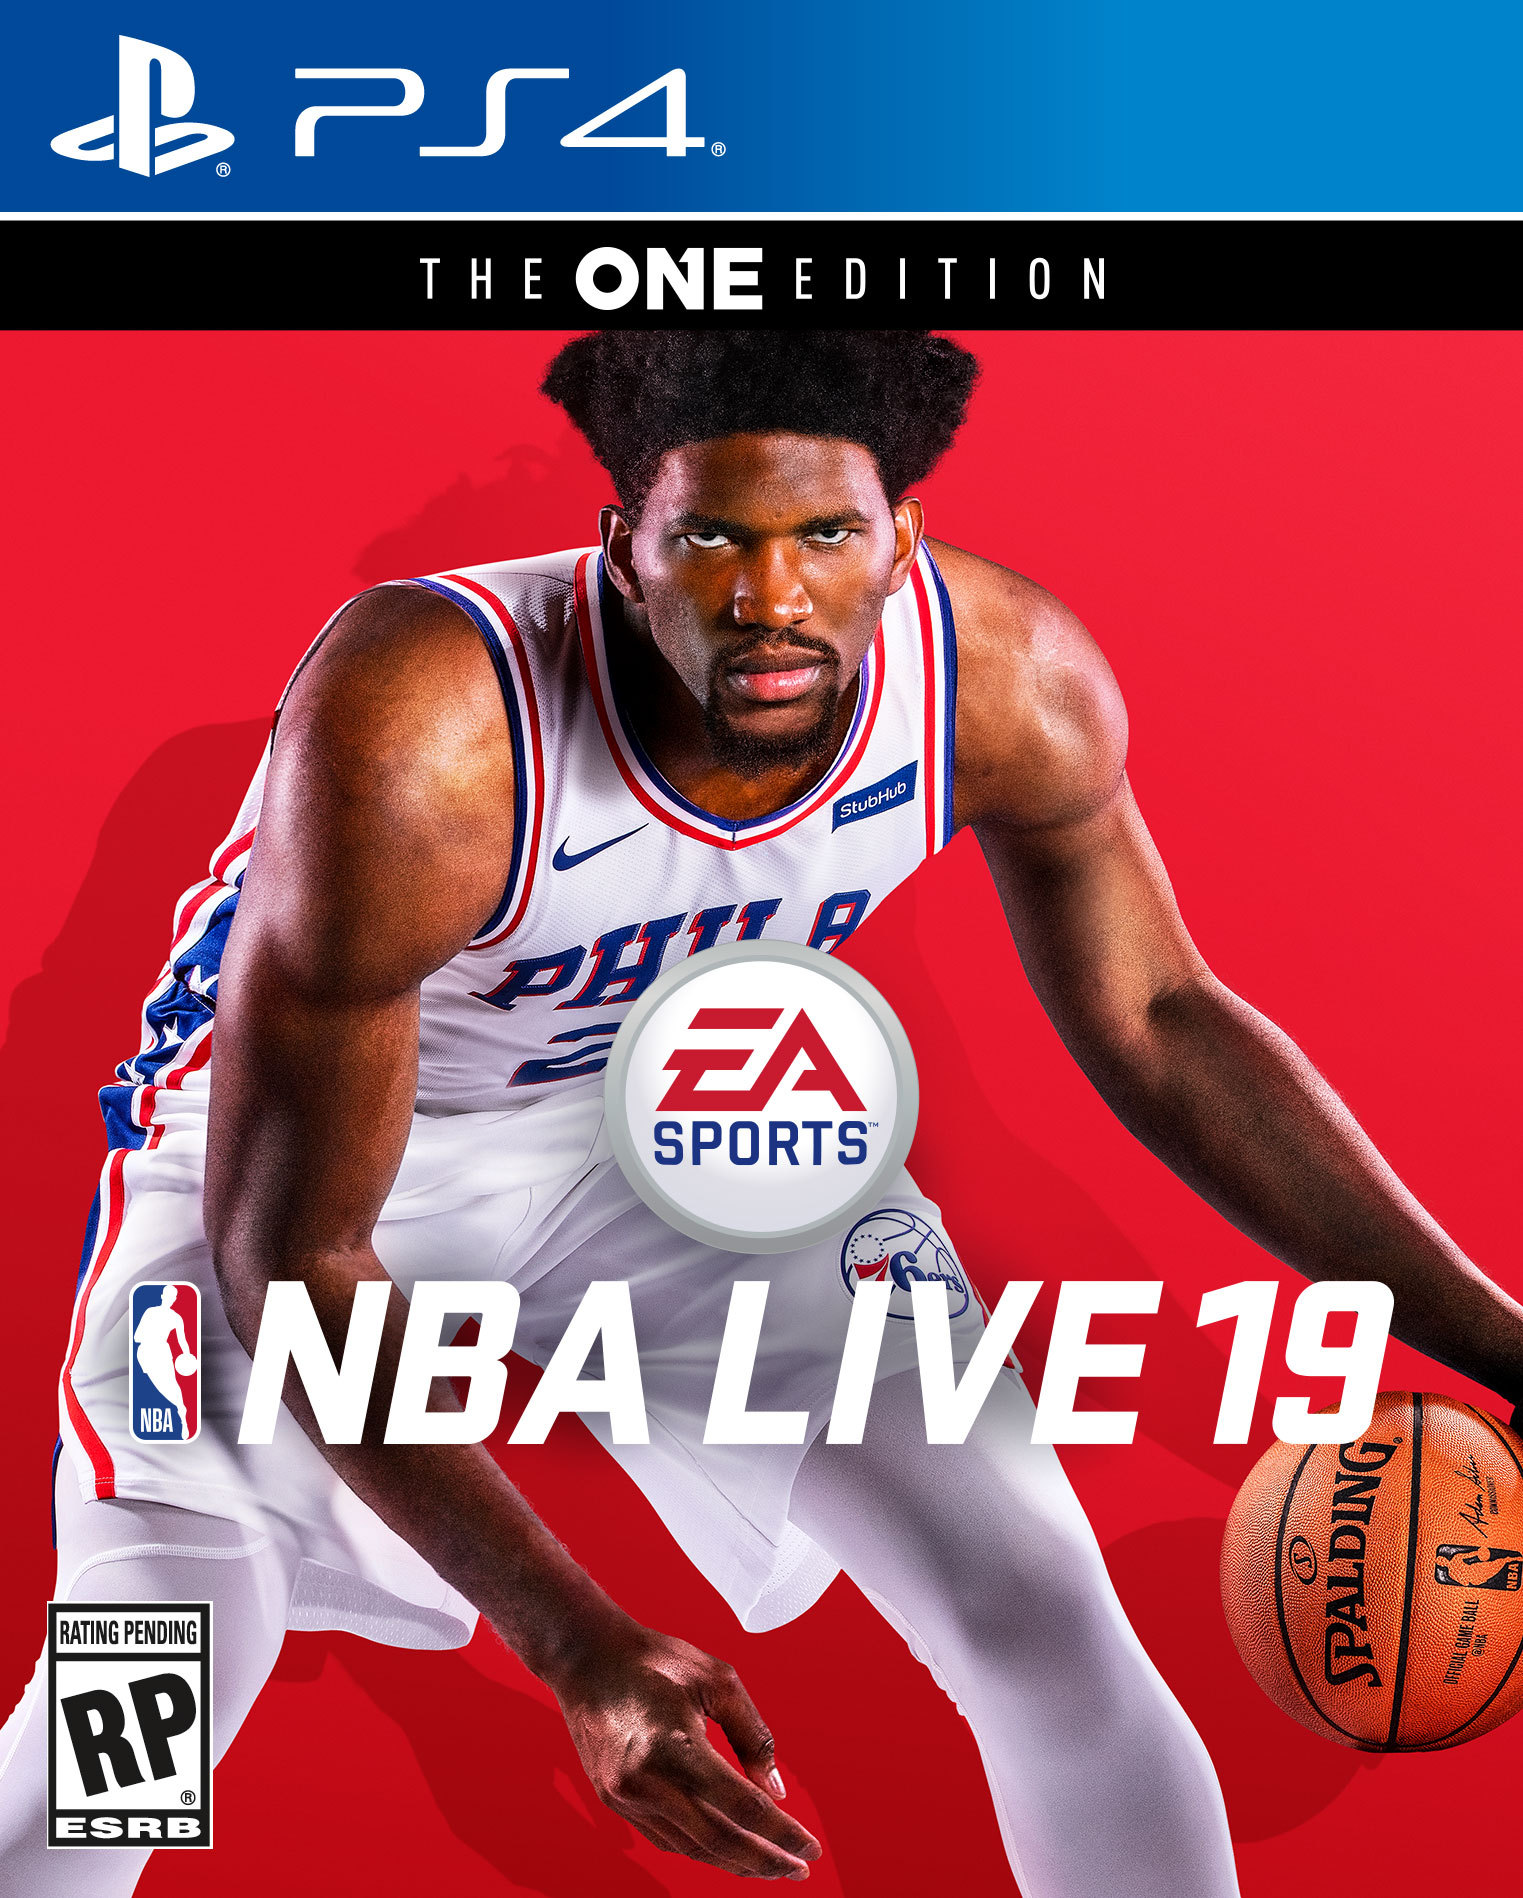 Joel Embiid Revealed As NBA Live 19 The One Edition Cover Athlete